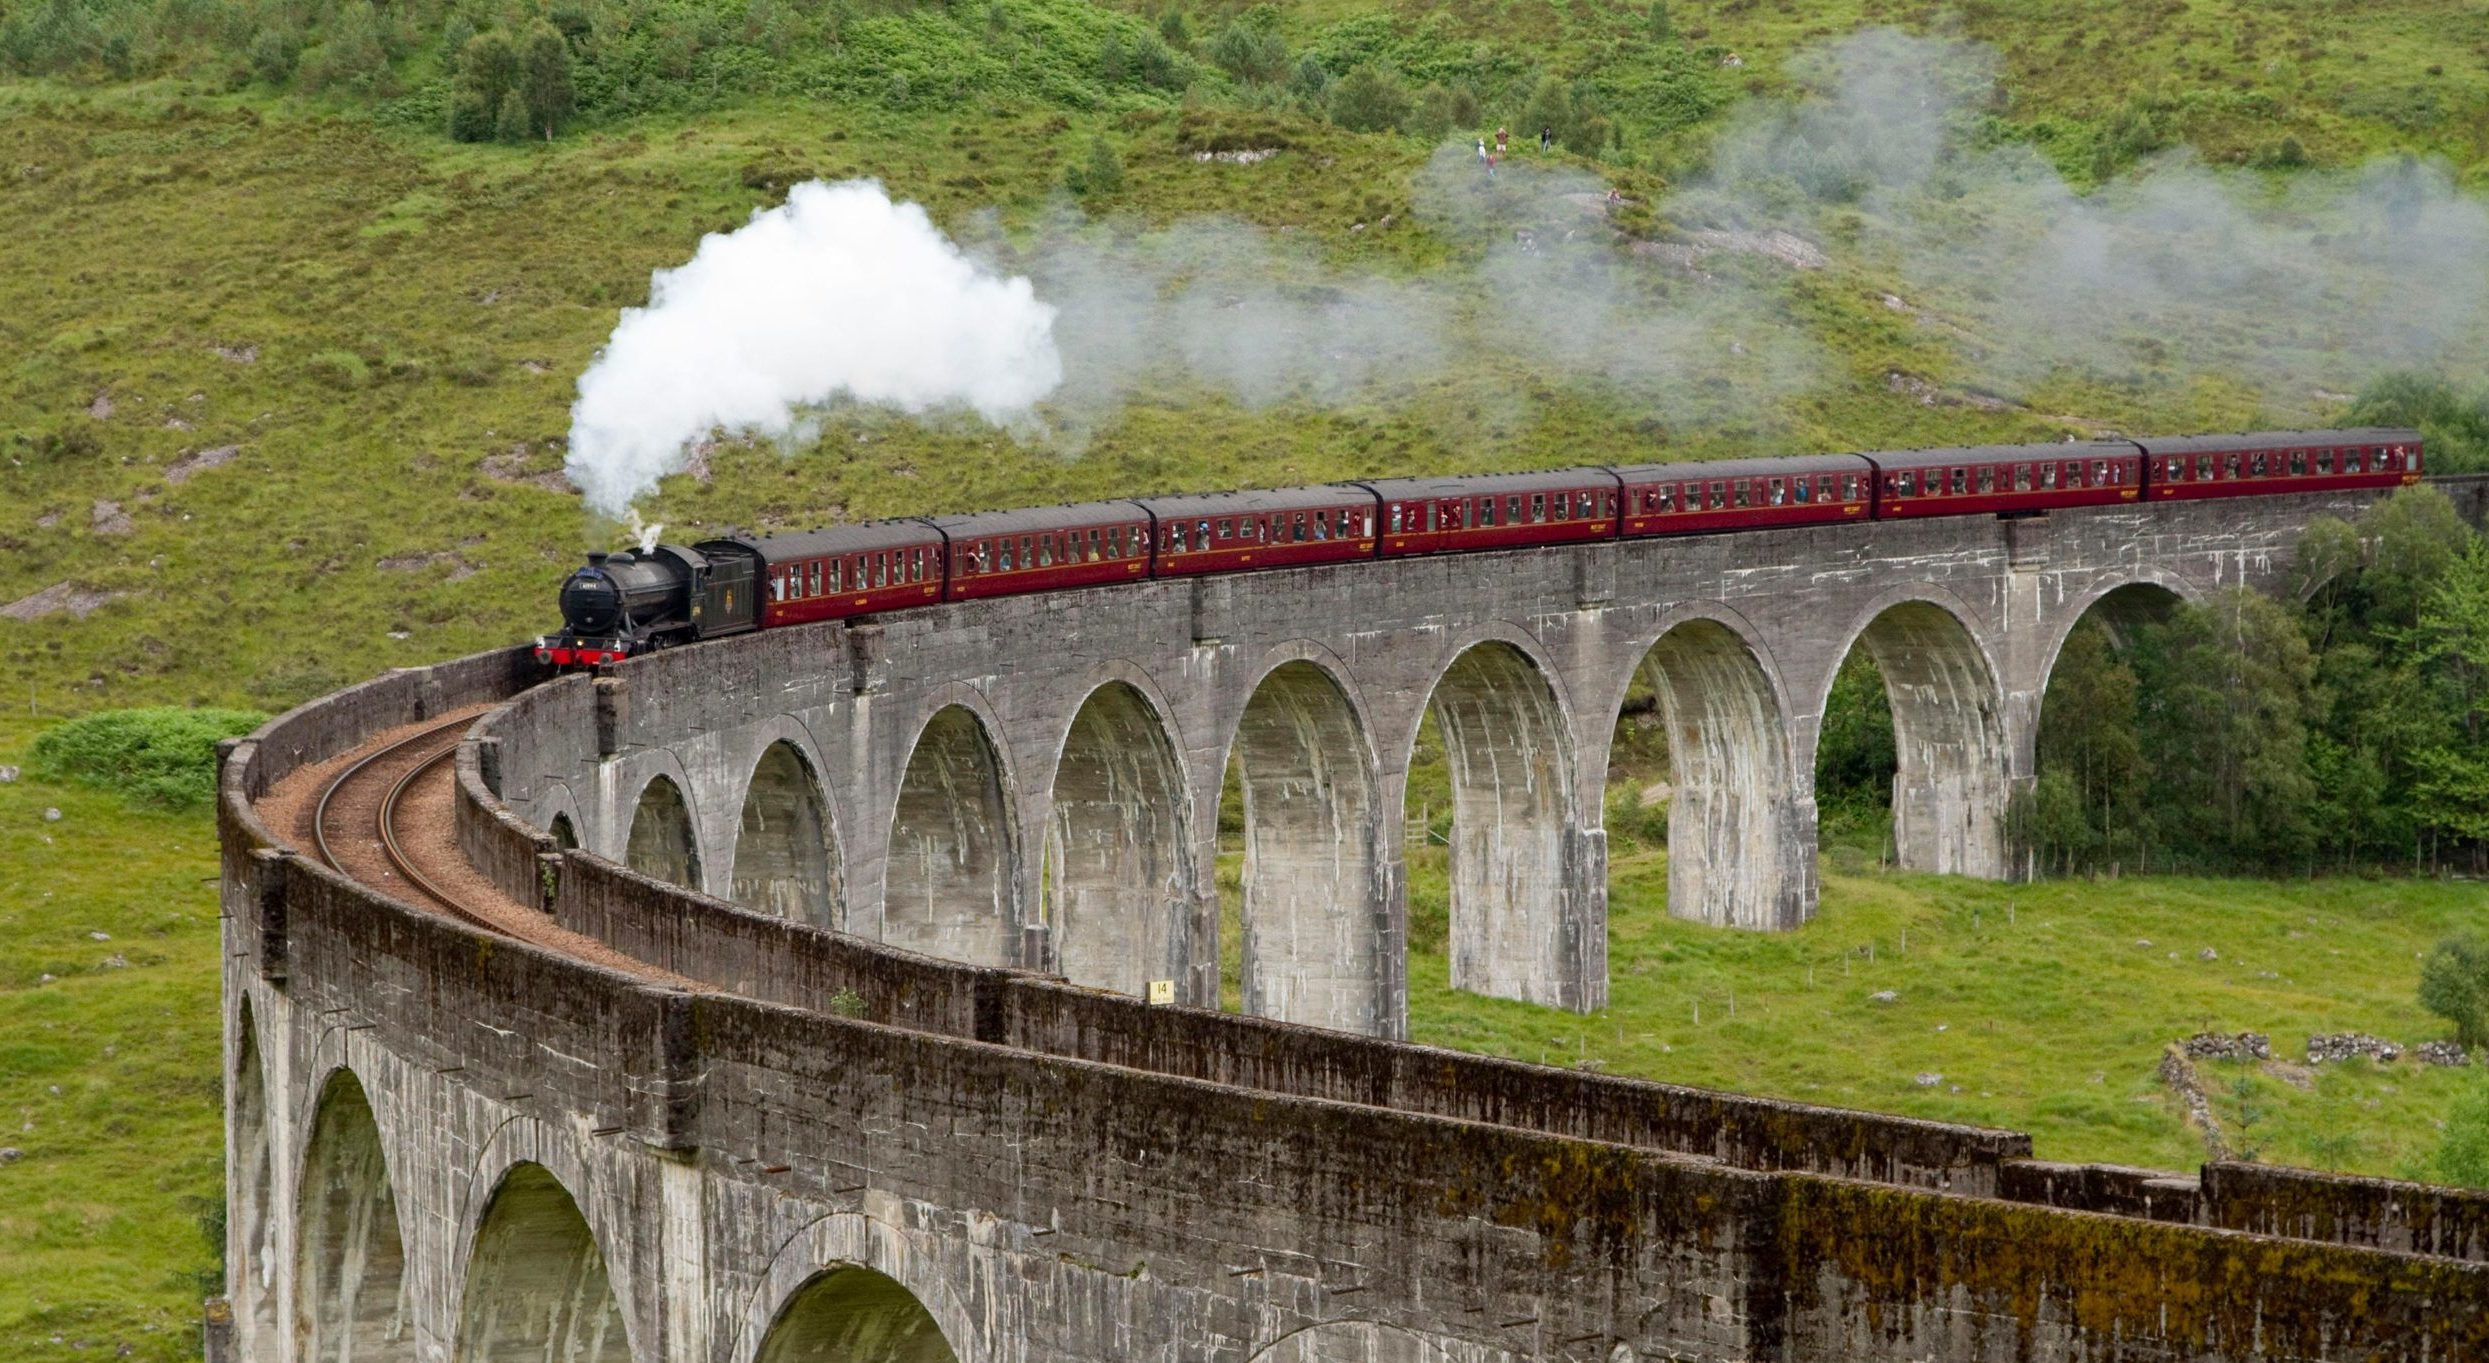 Glenfinnan Viaduct is one of the highlights of the West Highland Line.